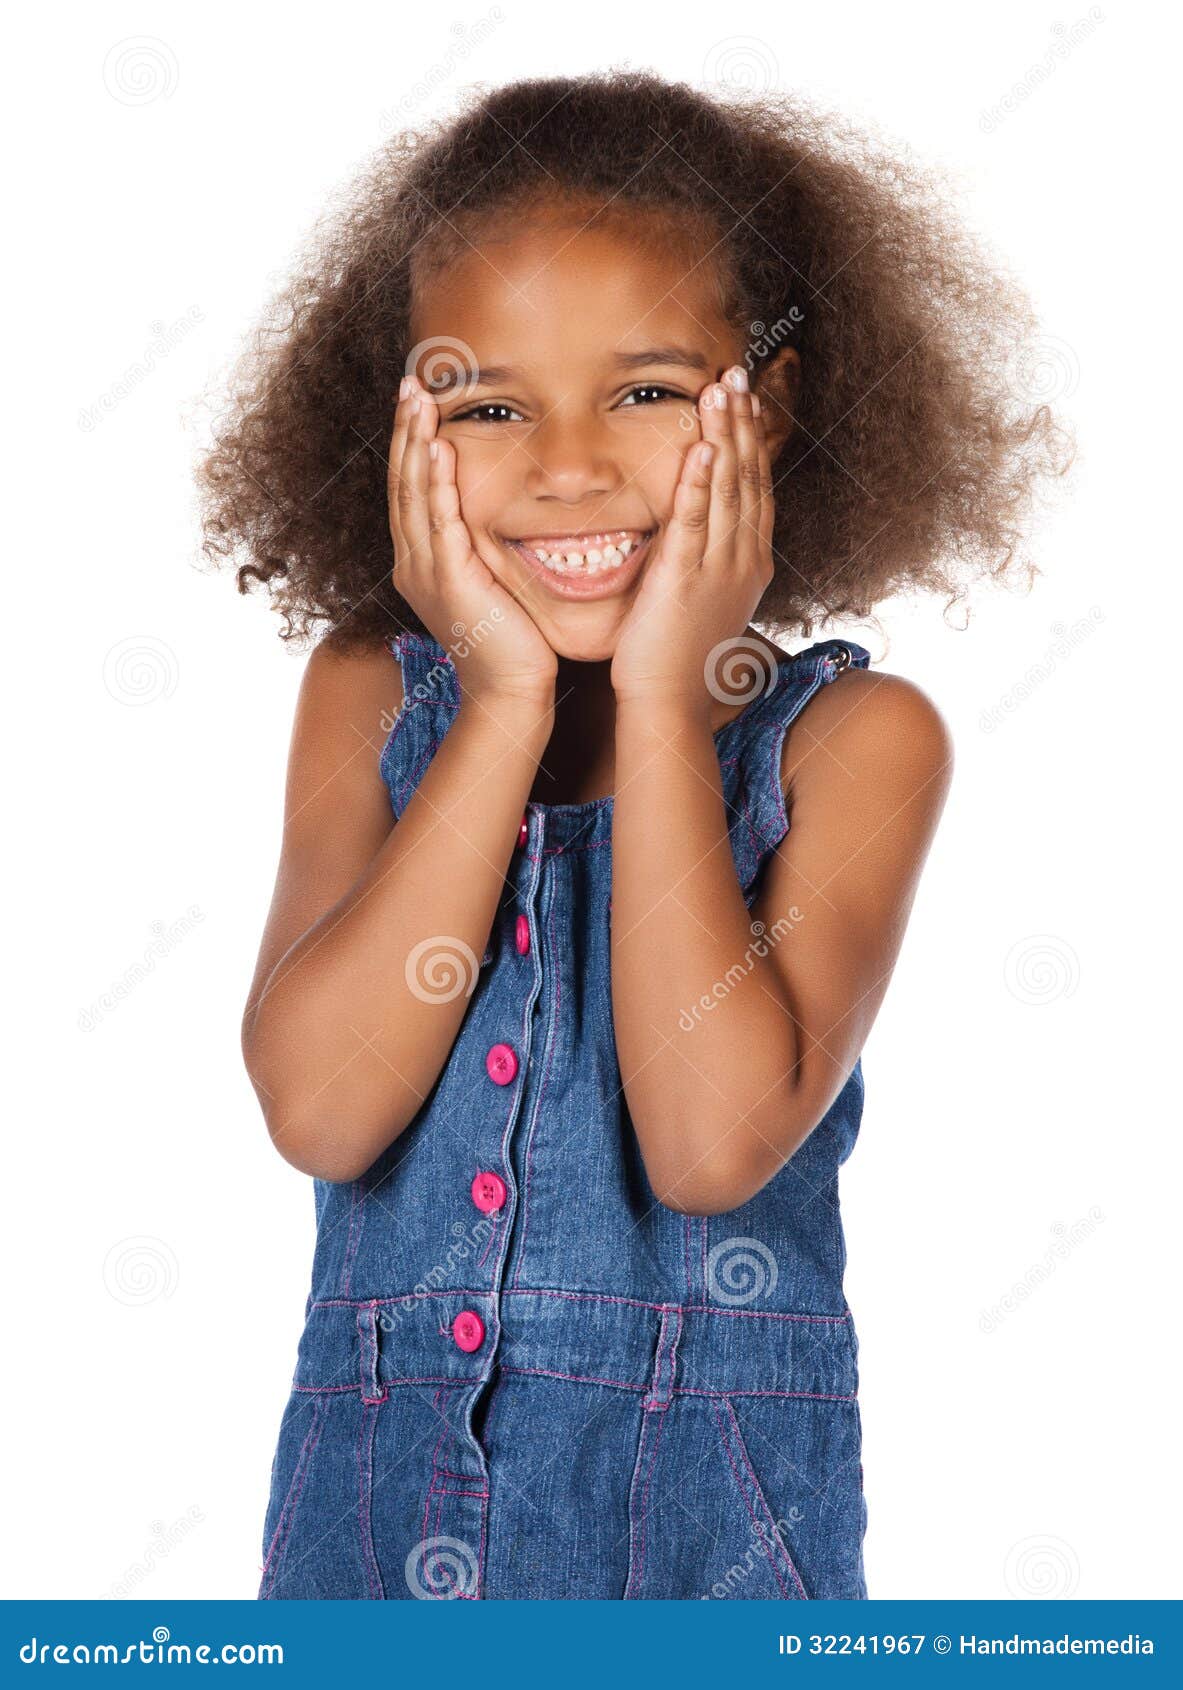 Cute African Girl Stock Image Image Of Innocence Lifestyle 32241967 